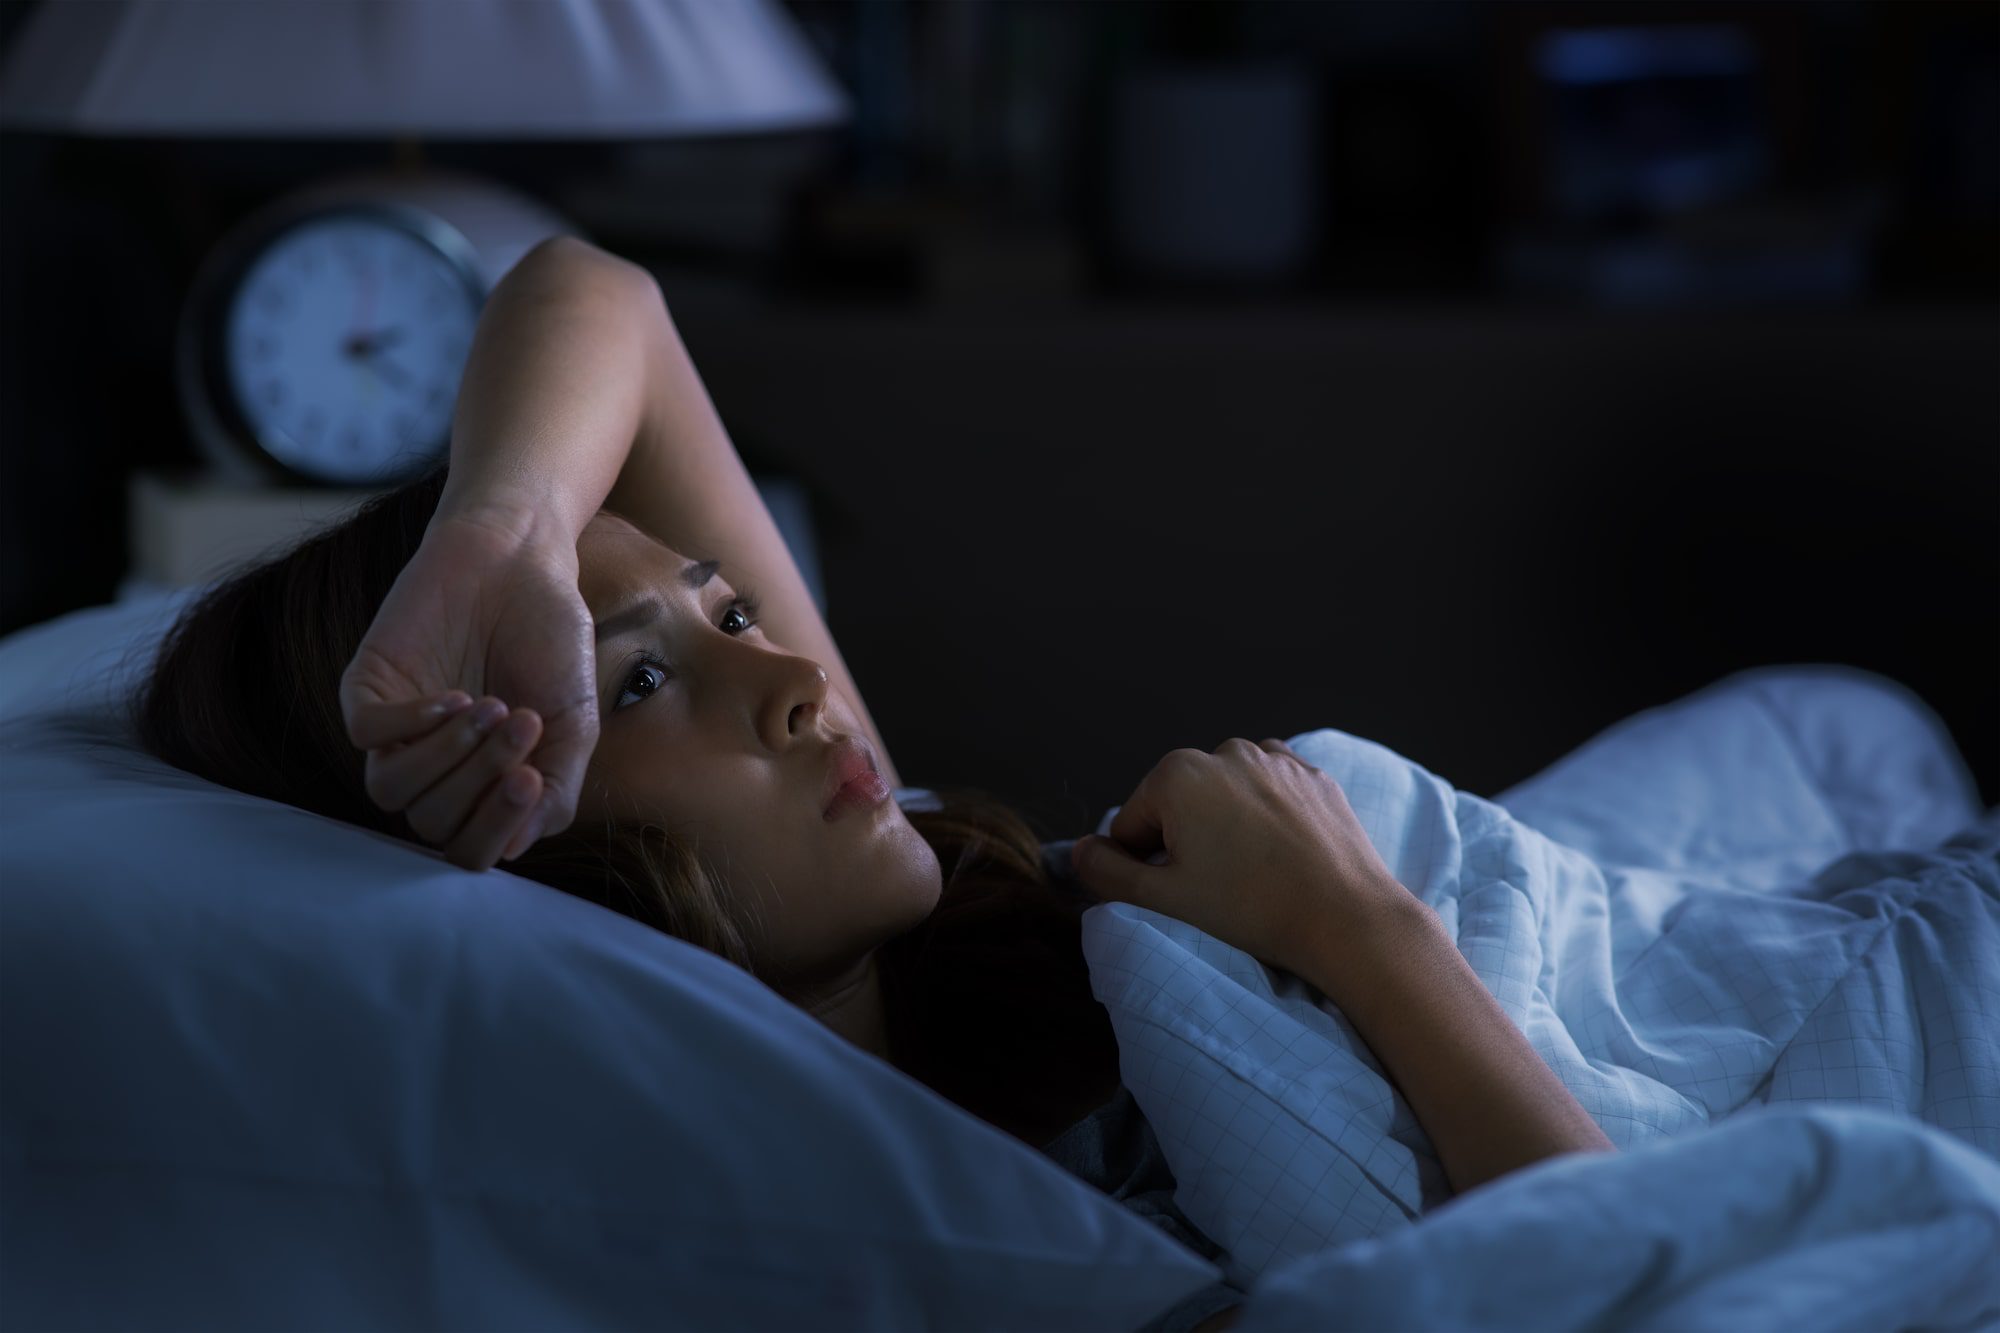 Painsomnia Steals 51.5 Minutes of Our Sleep Every Night. How Do We Cope?